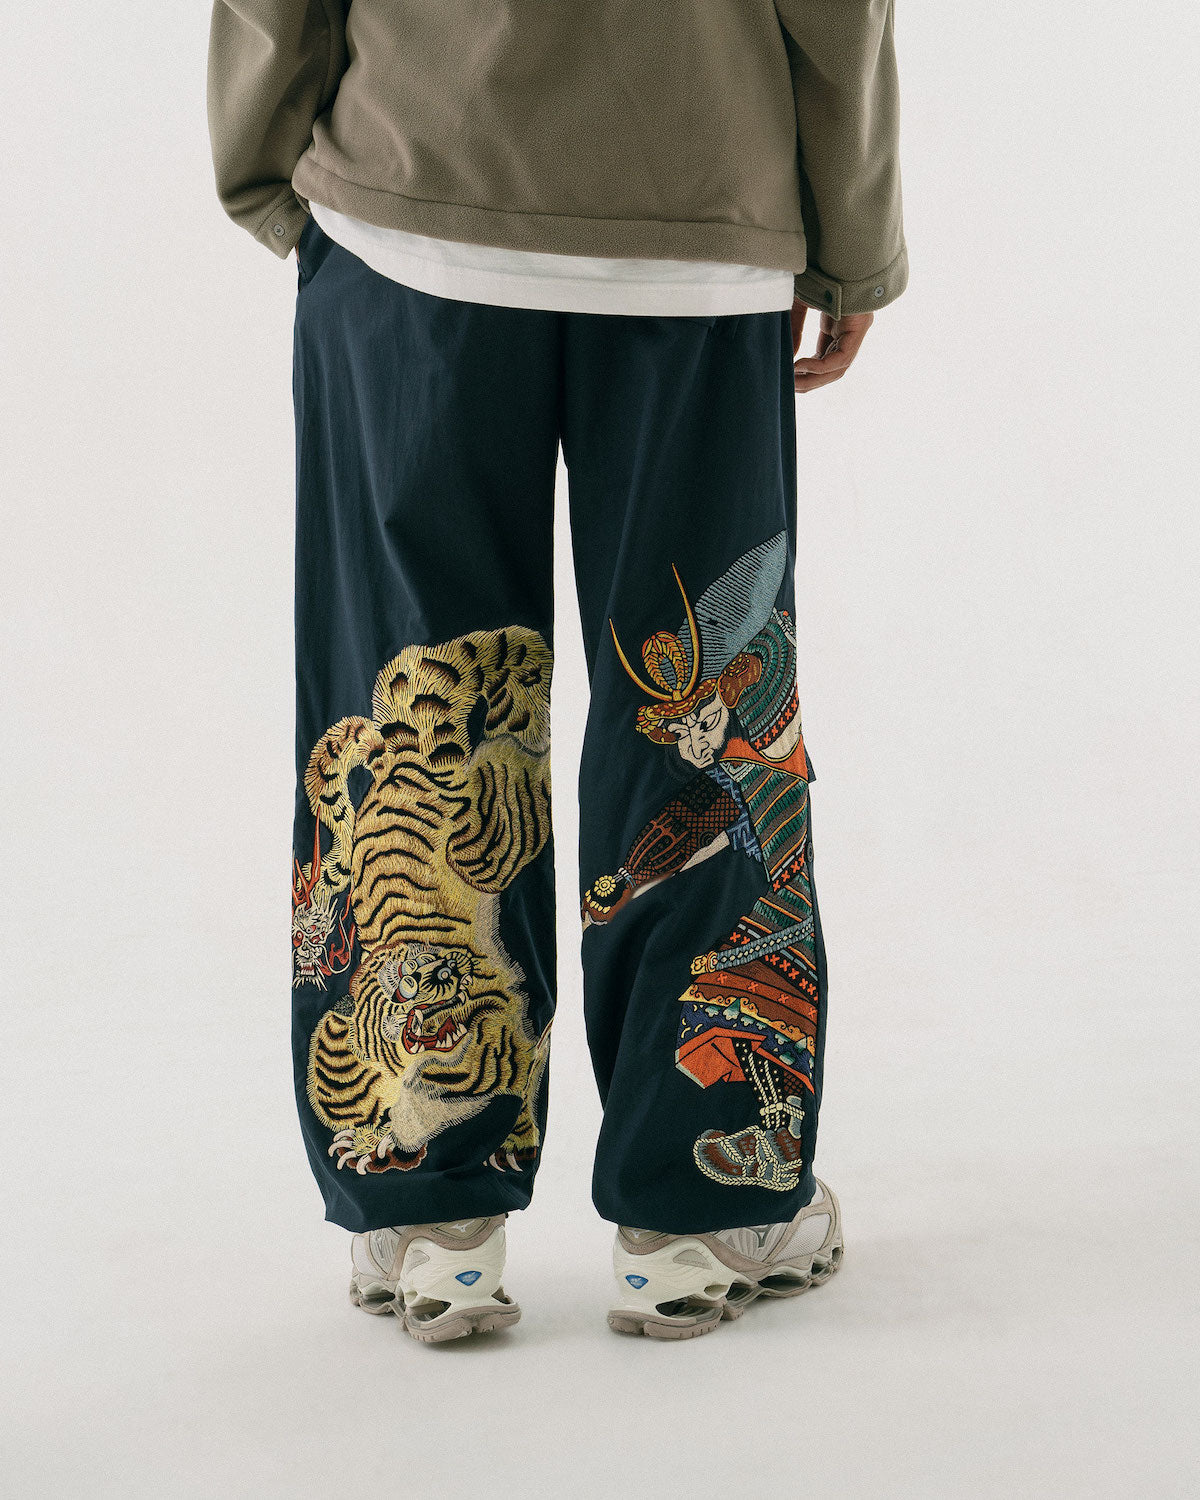 Embroidered Snopants®